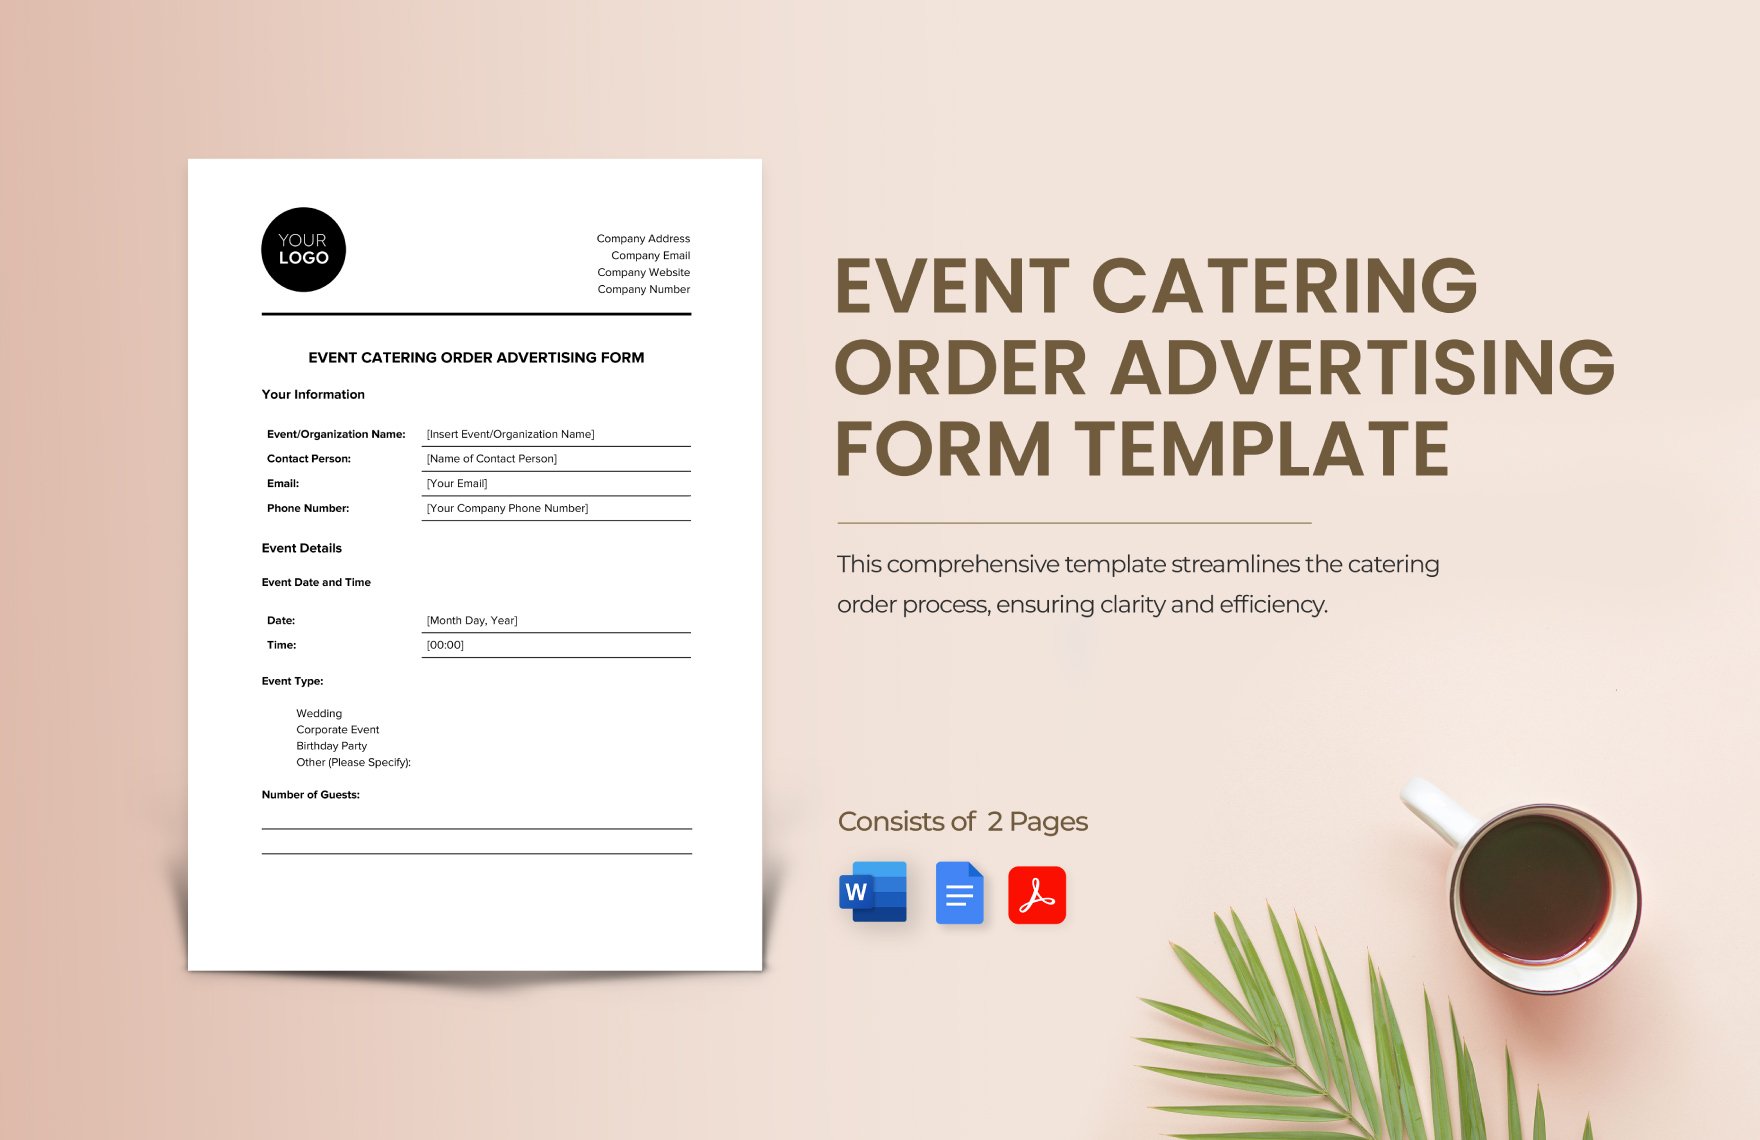 Free Event Catering Order Advertising Form Template in Word, Google Docs, PDF